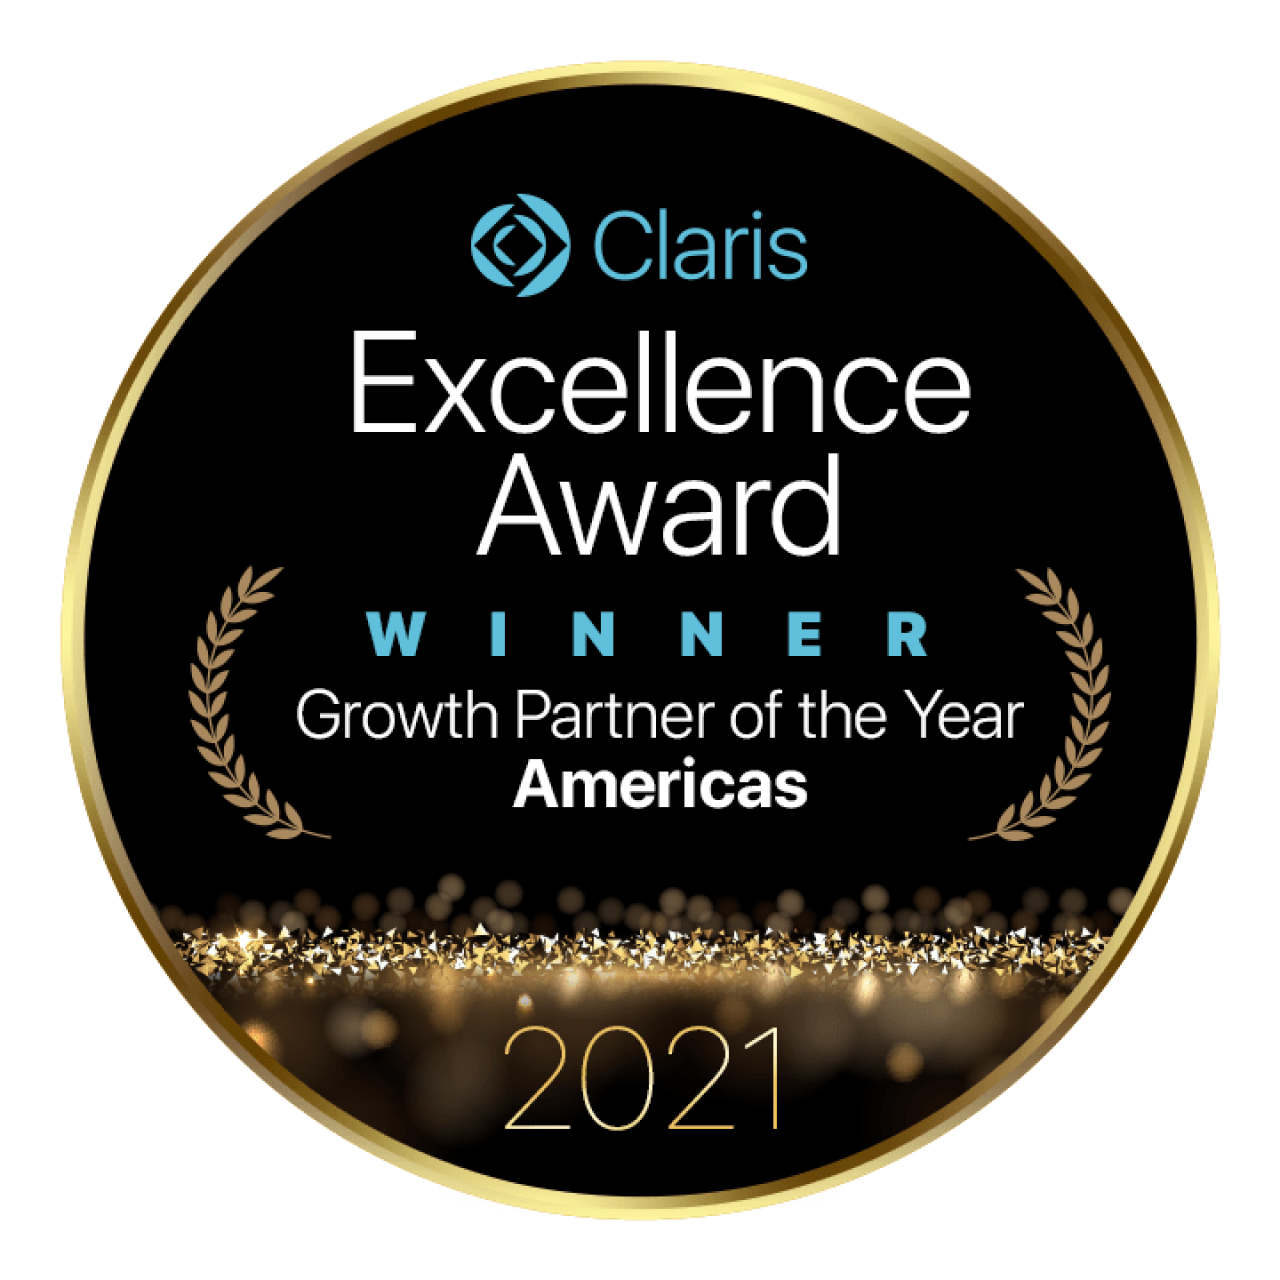 Claris Excellence Award Winner Growth Partner of the Year Americas 2021.